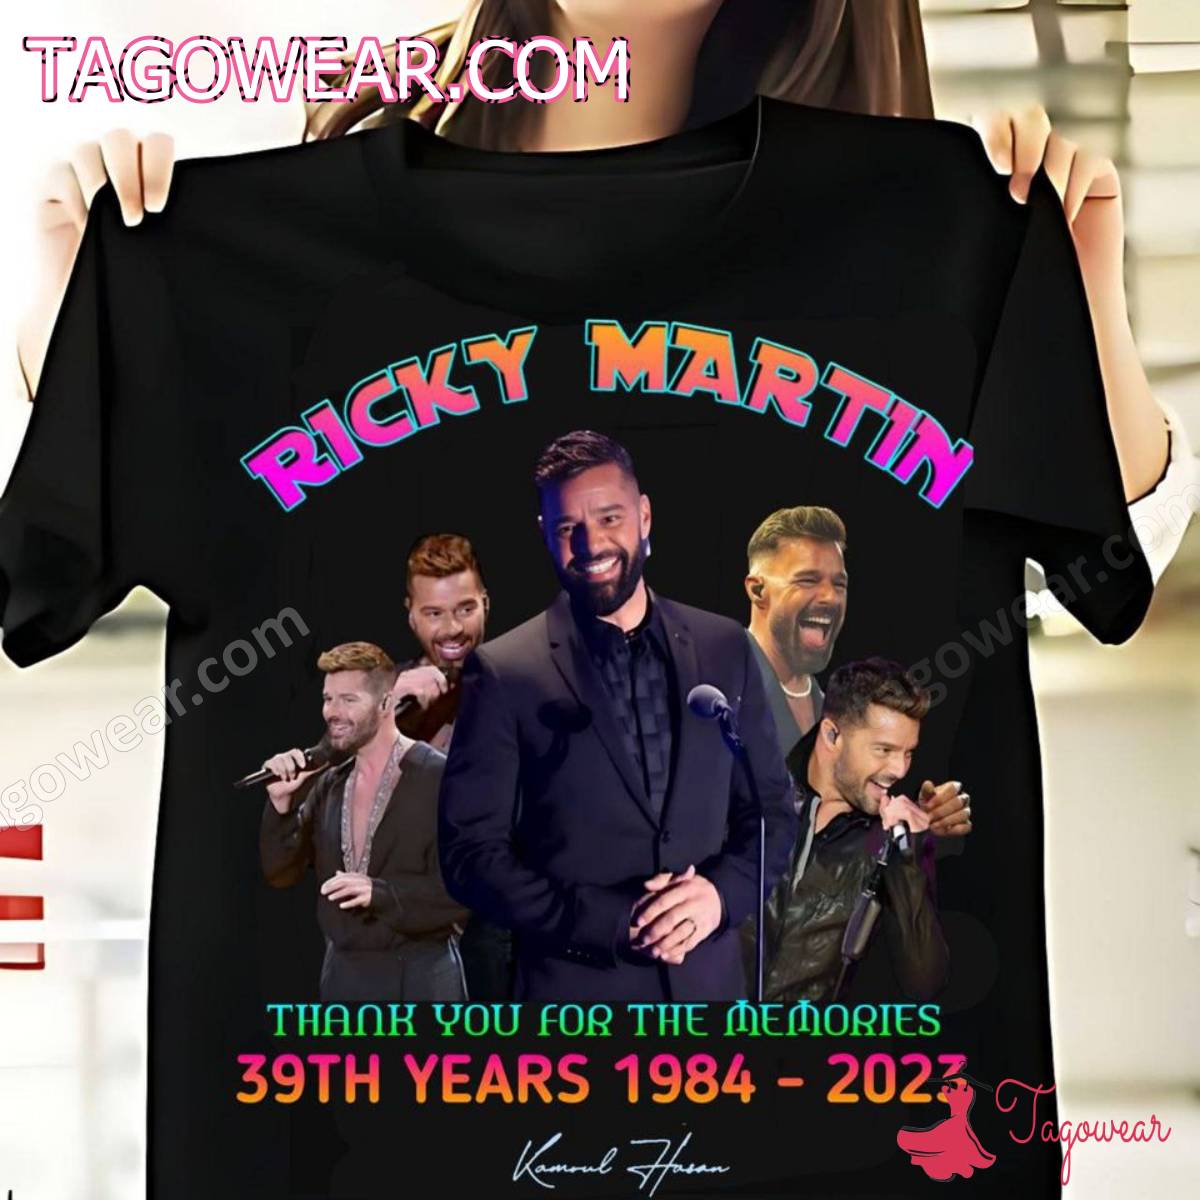 Ricky Martin Thank You For The Memories 39th Years 1984-2023 Signature Shirt